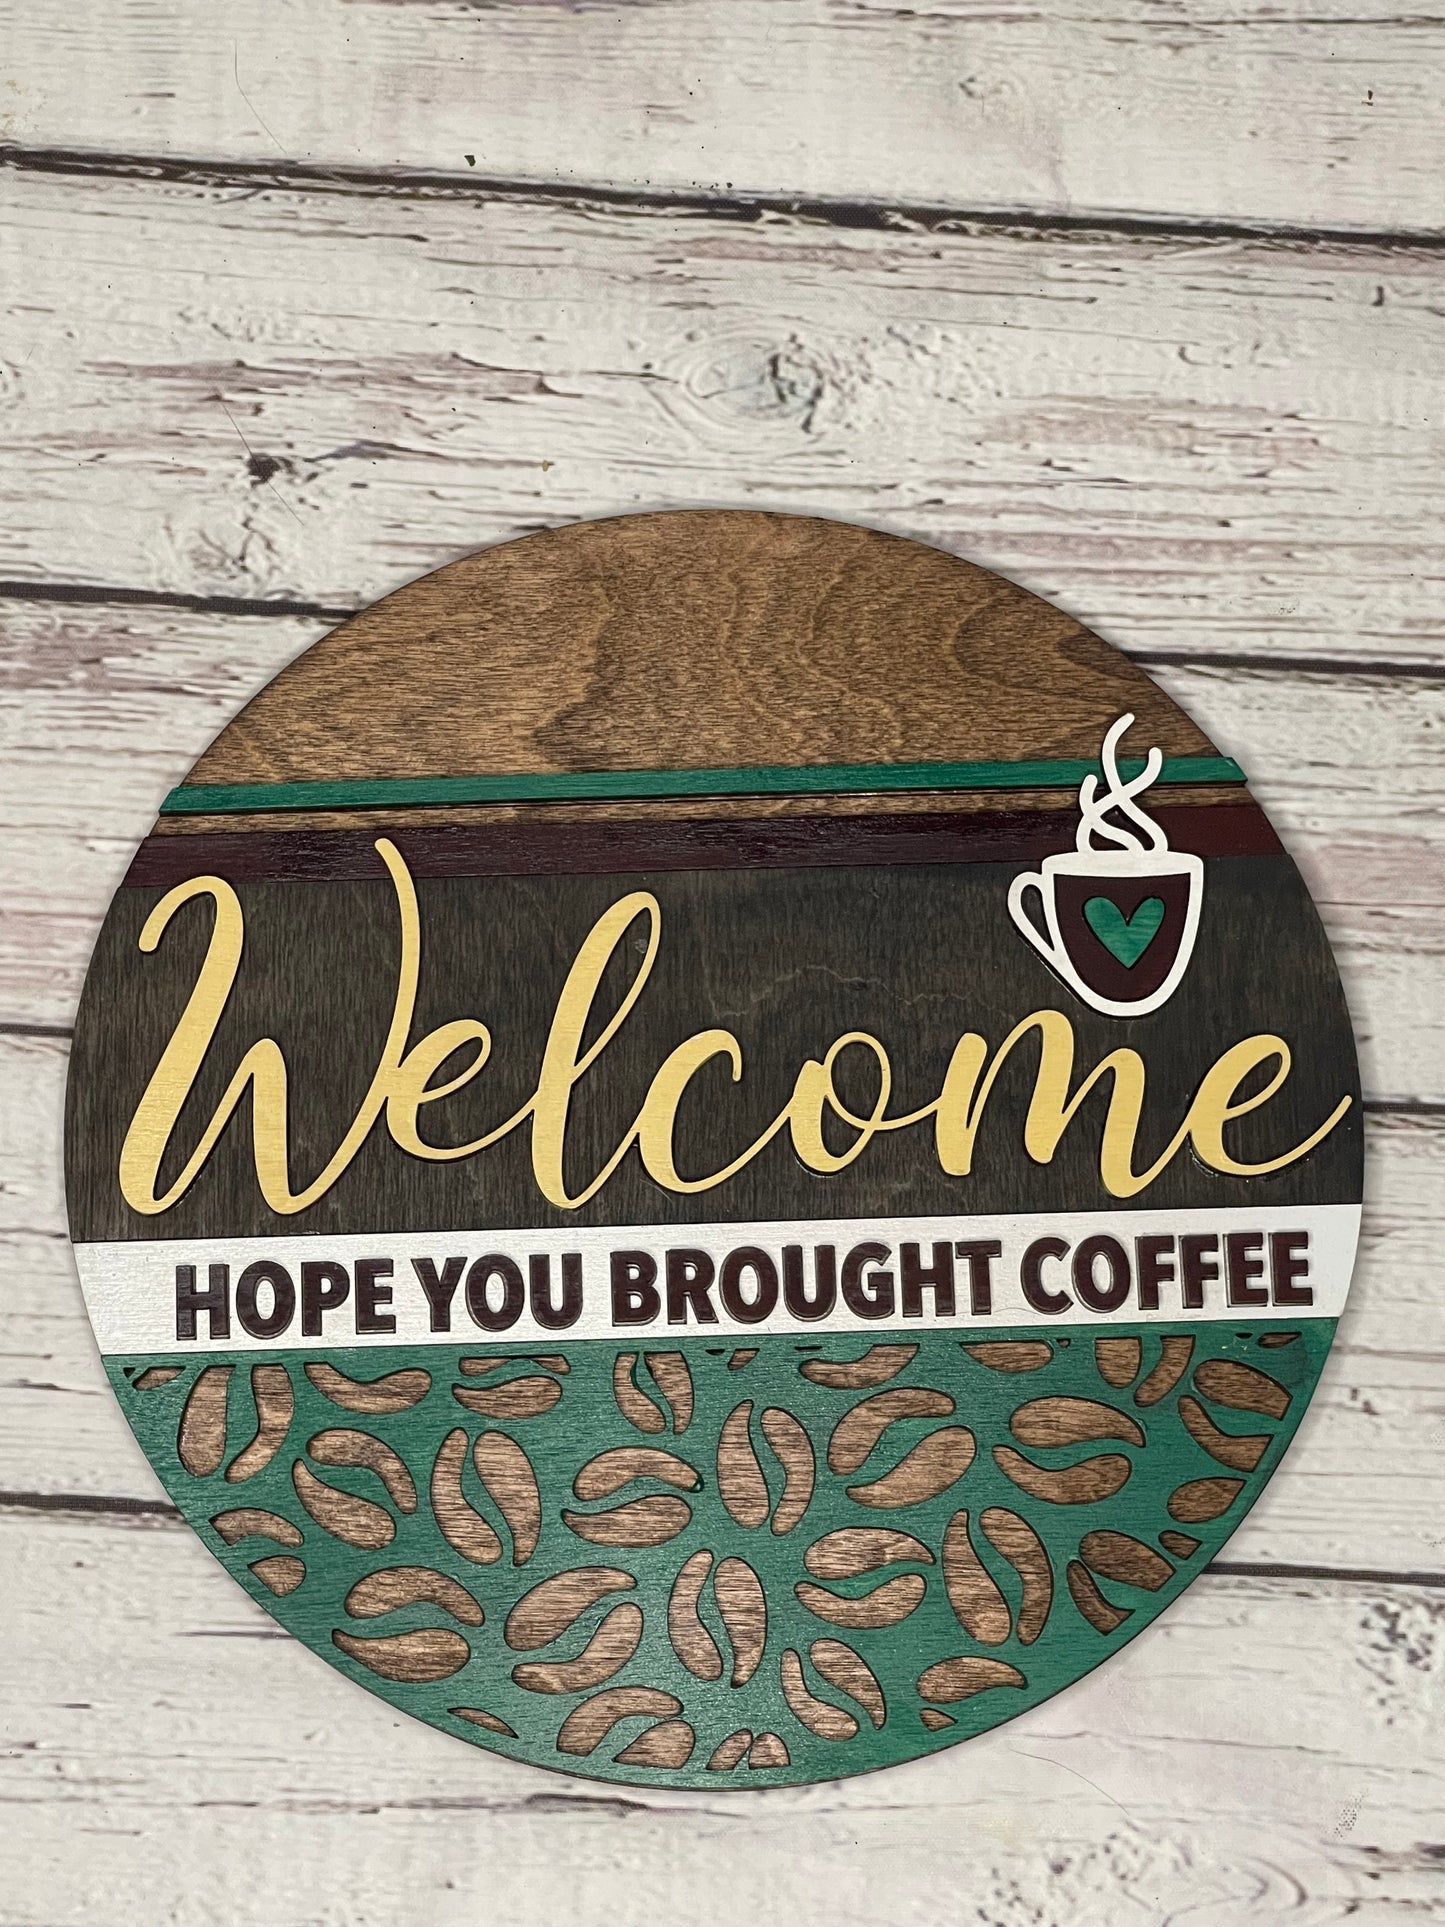 Welcome - Hope you brought coffee